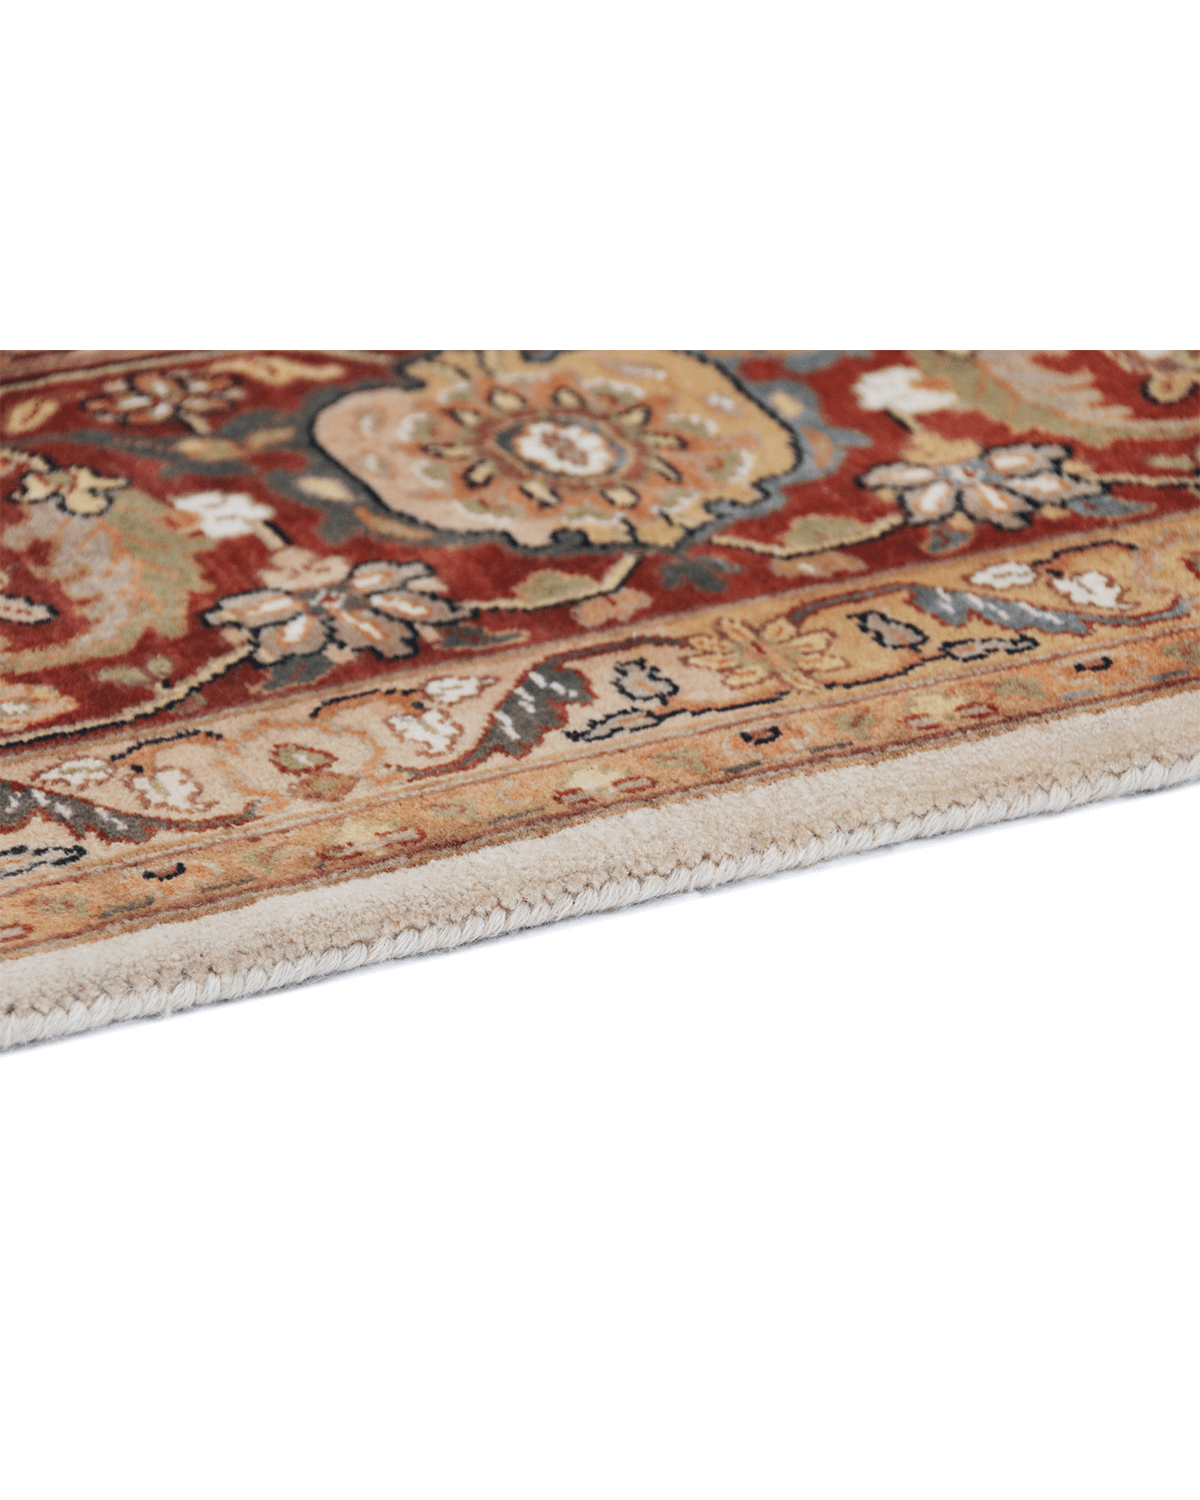 Hand-knotted Traditional Rug (Ziegler-191)